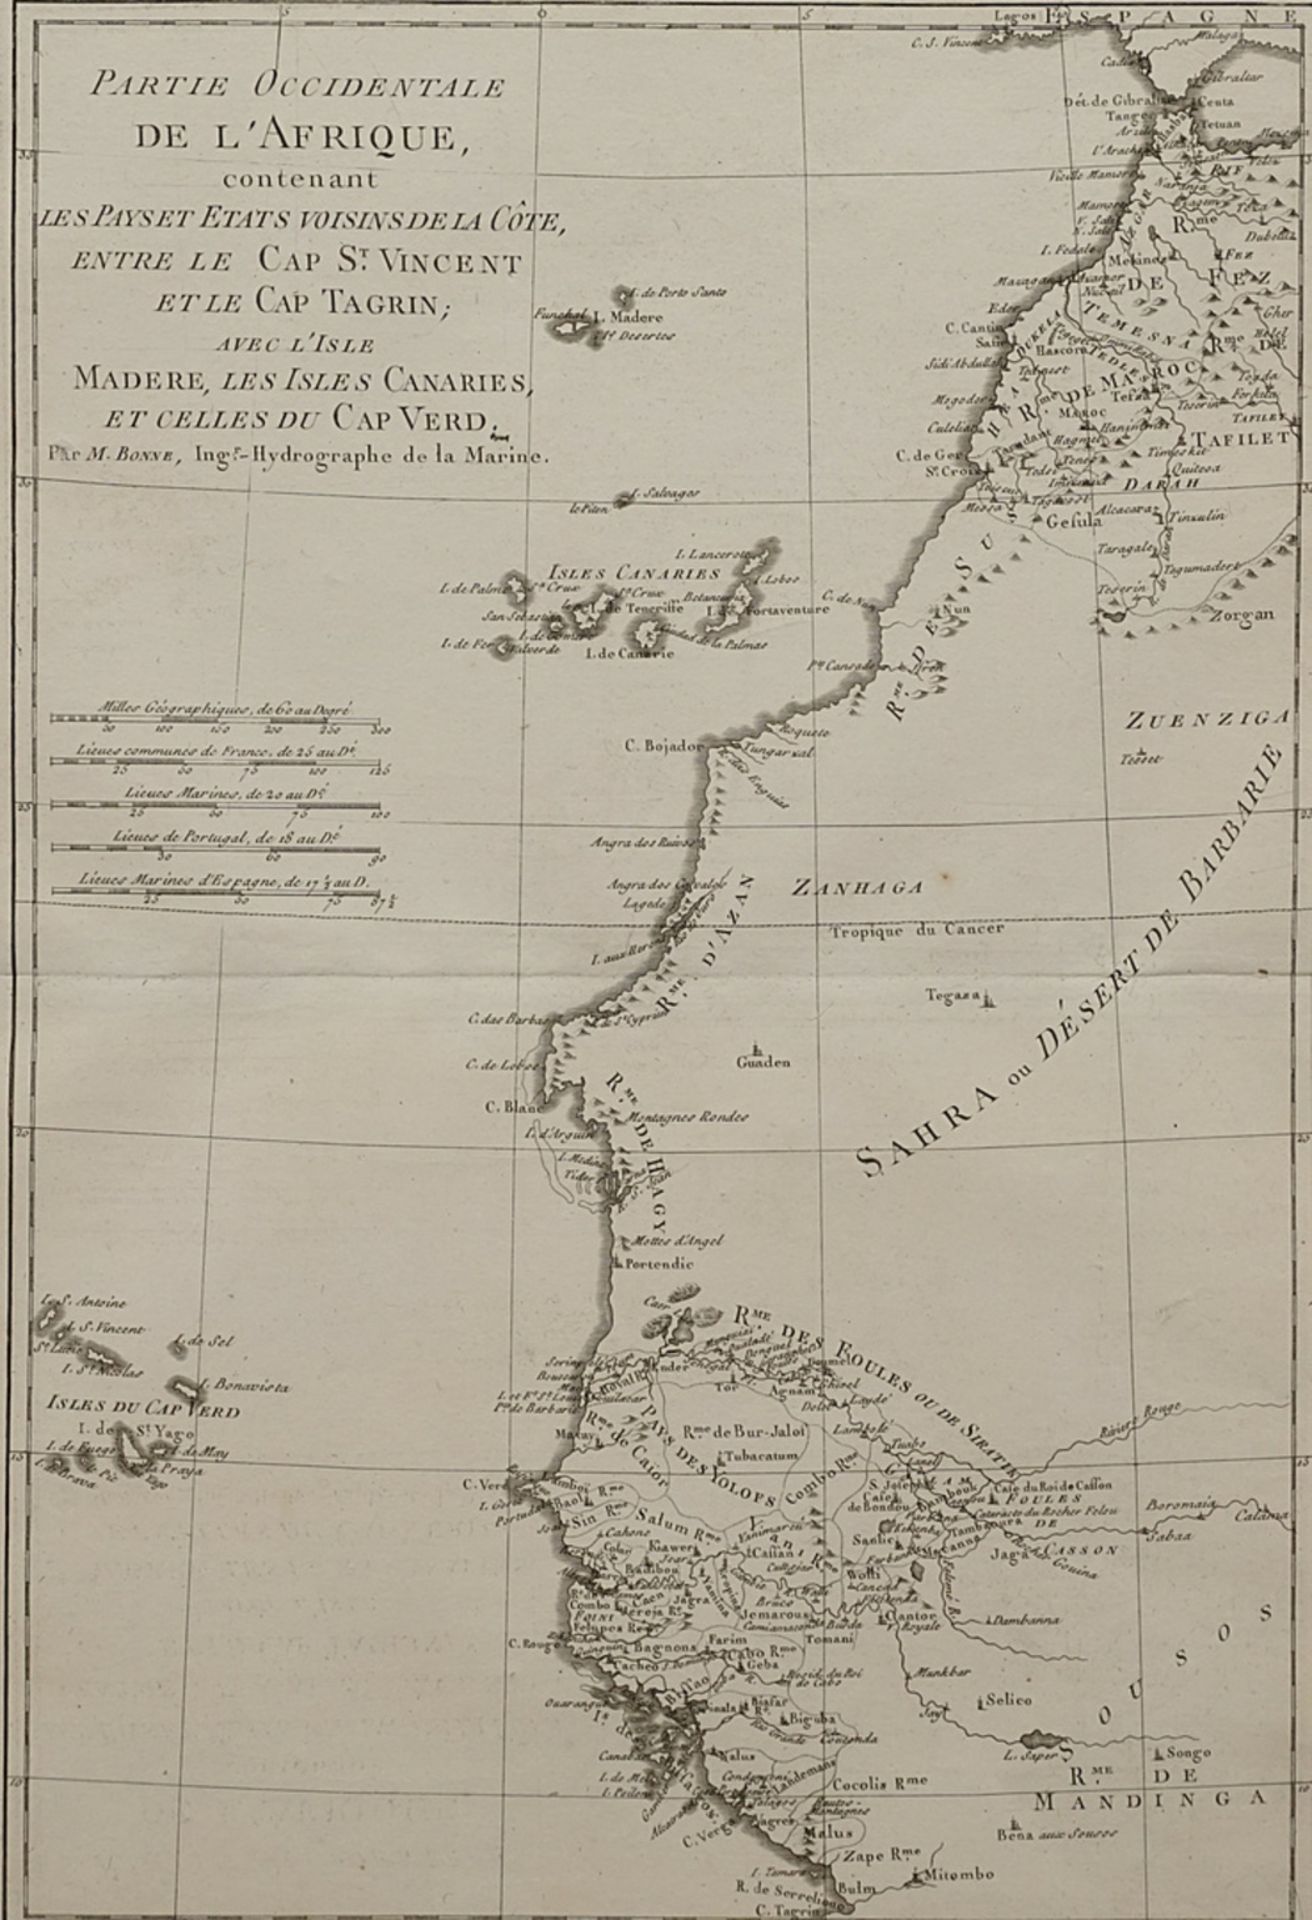 André, Map of the West Coast of Africa